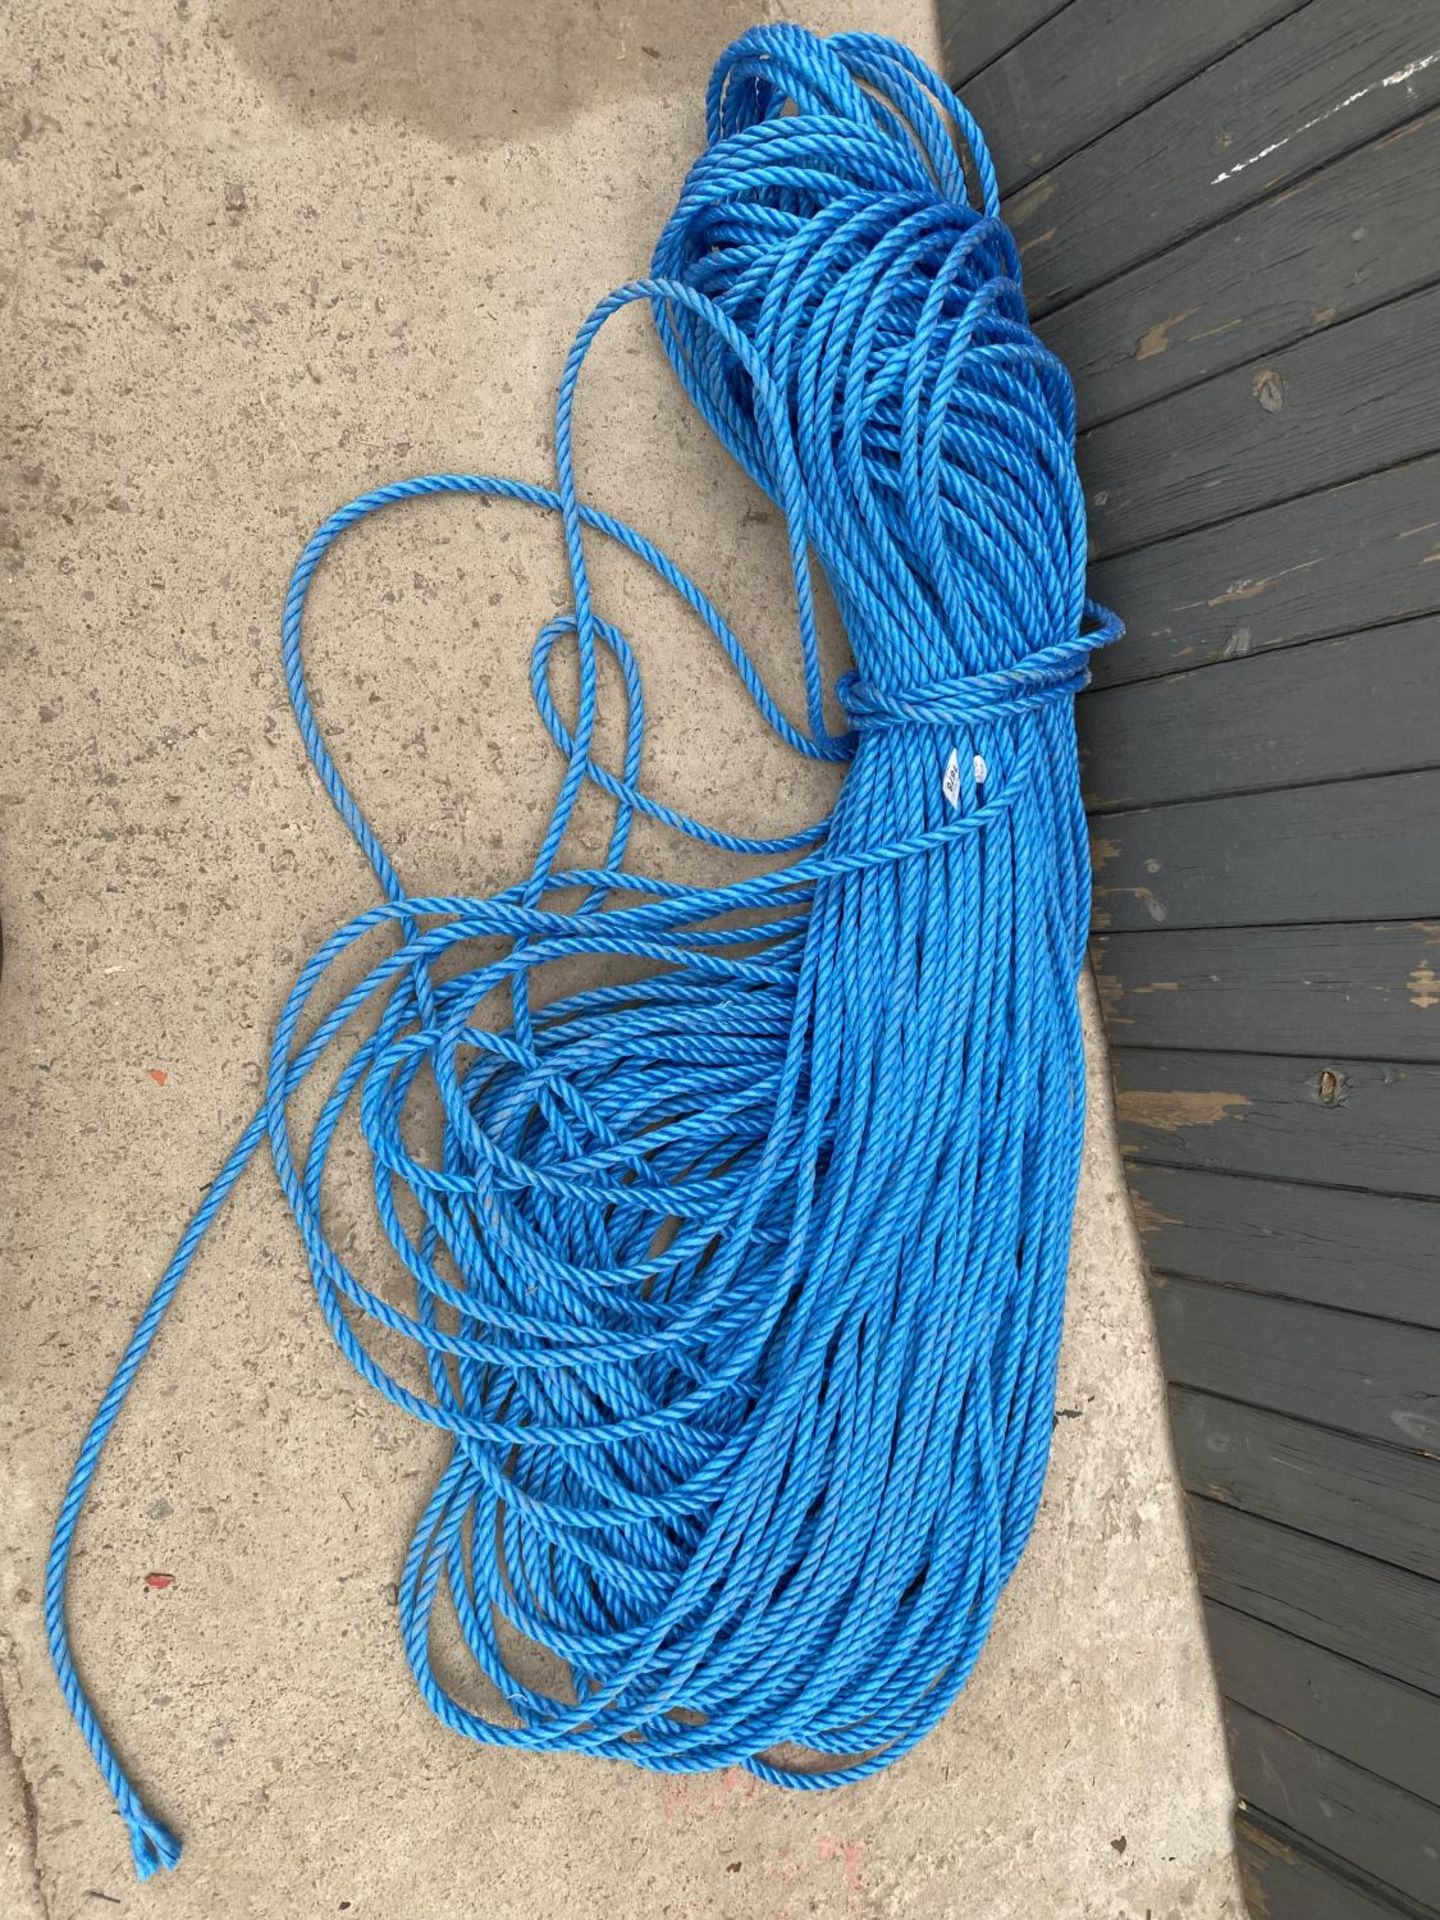 A LARGE QUANTITY OF BLUE ROPE - Image 3 of 3